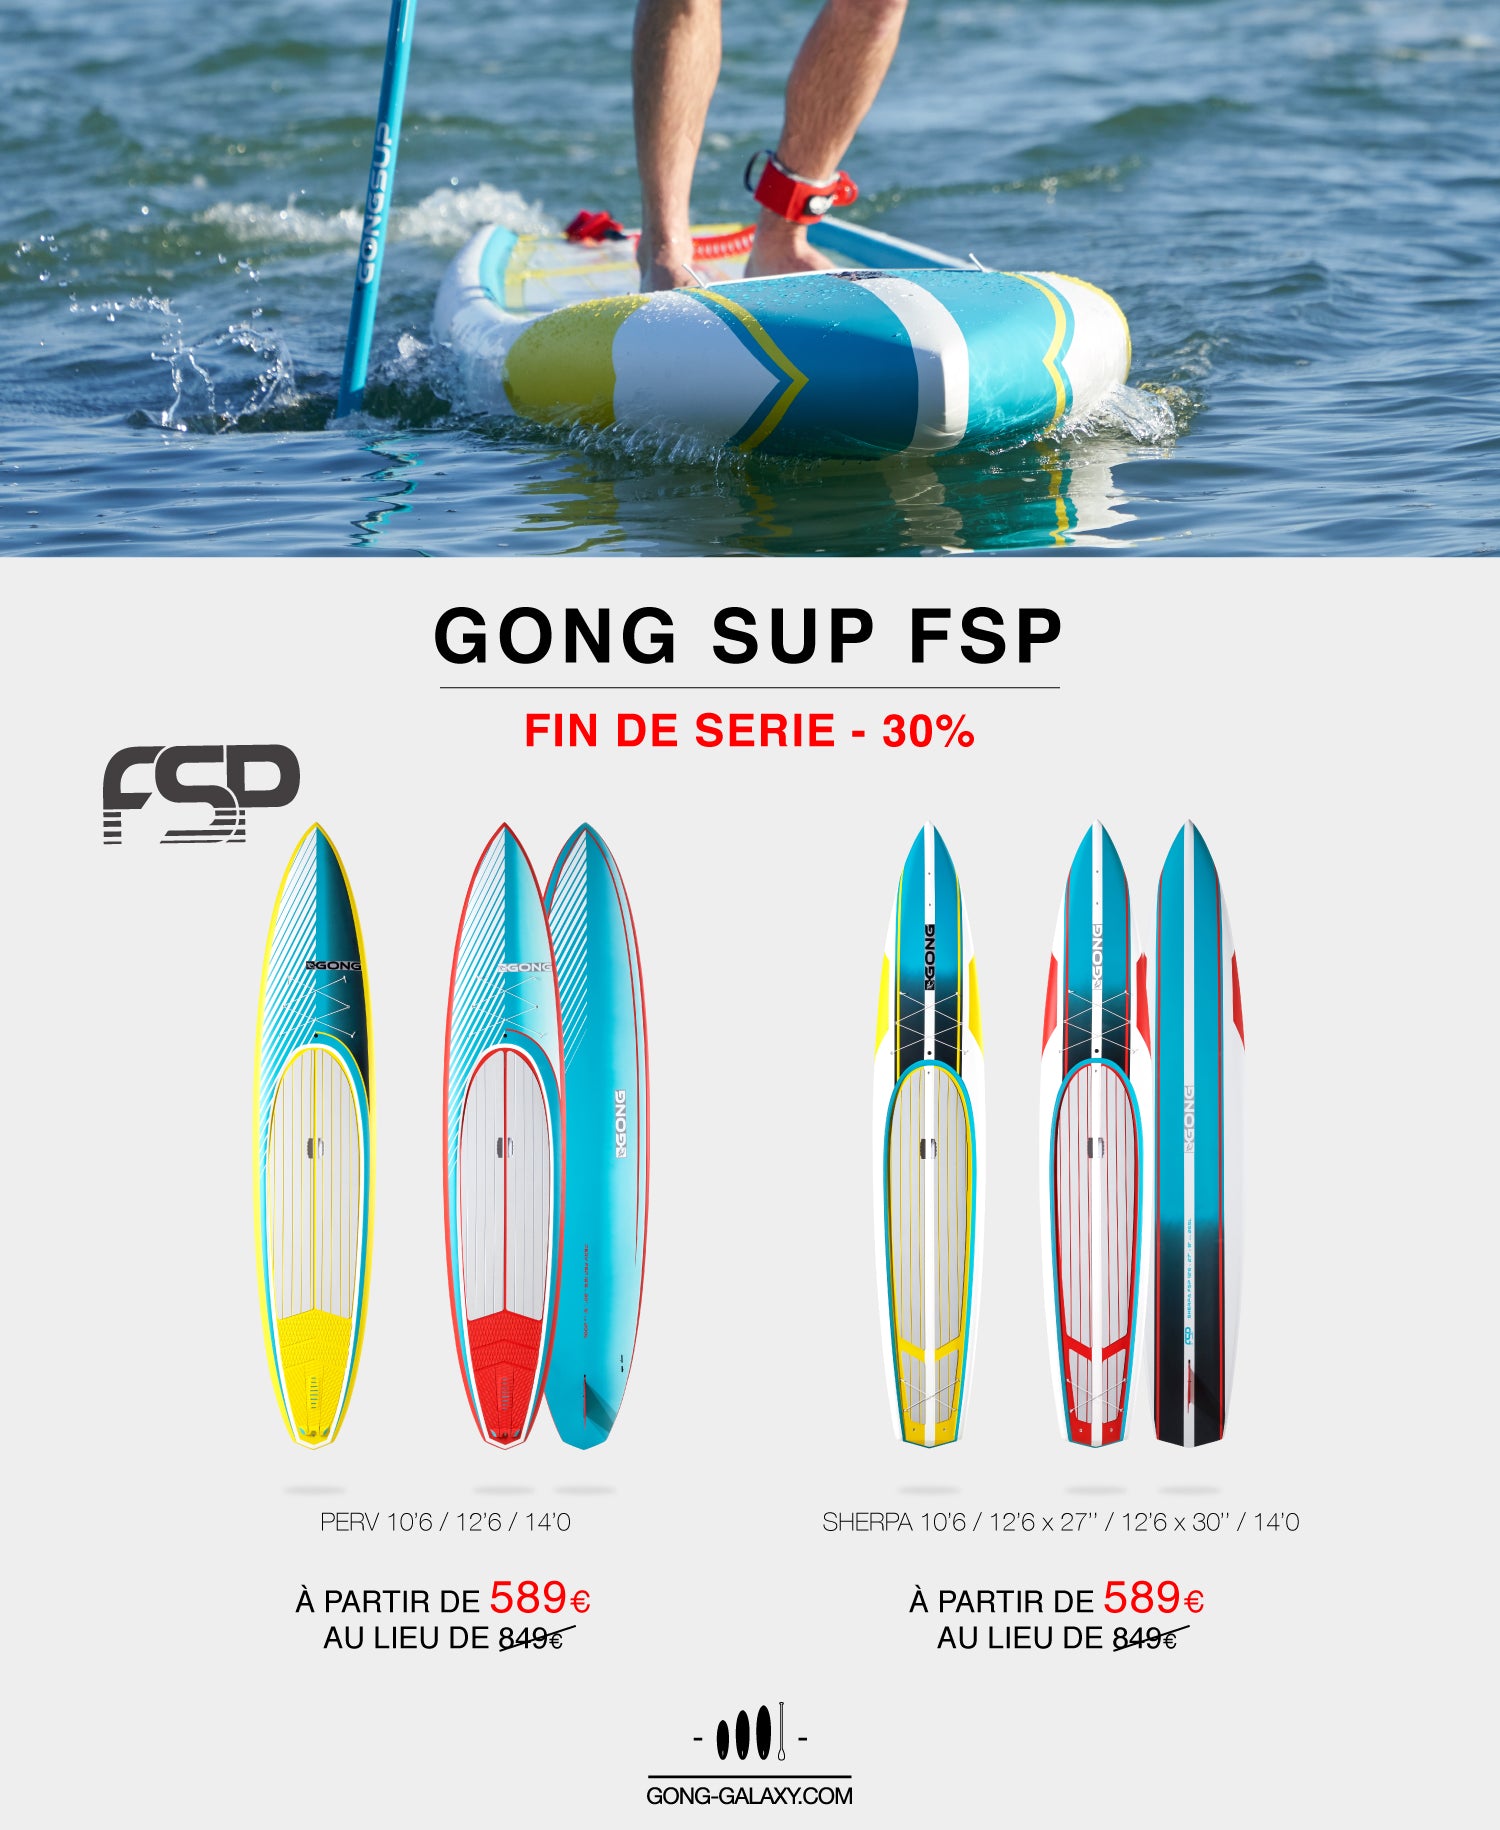 SHOP : 30% reduction on GONG SUP PERV/SHERPA FSP !!!